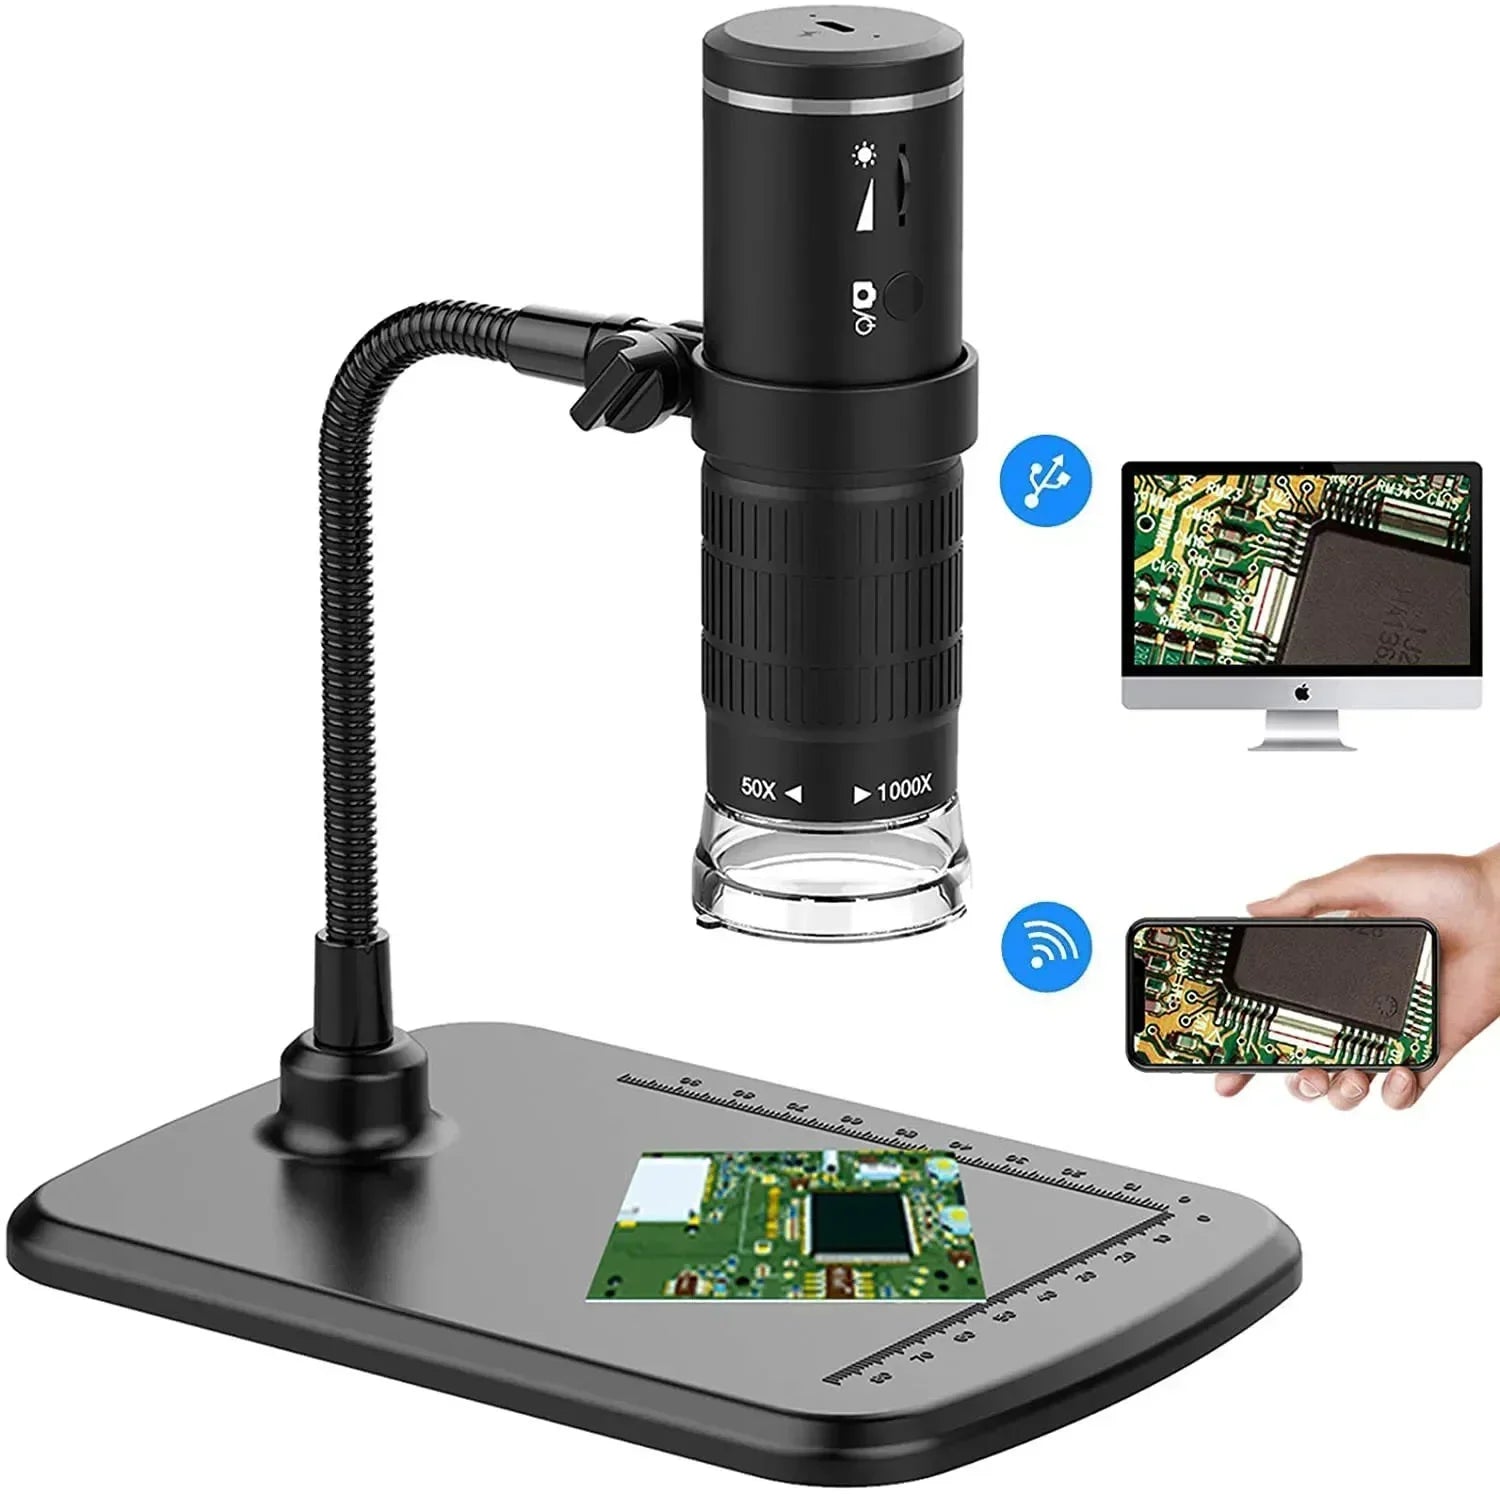 Microscope Magnification 50x-1000x Wireless Inspection Iphone Ipad HD For Camera USB Flexible With Handheld Digital PC Stand